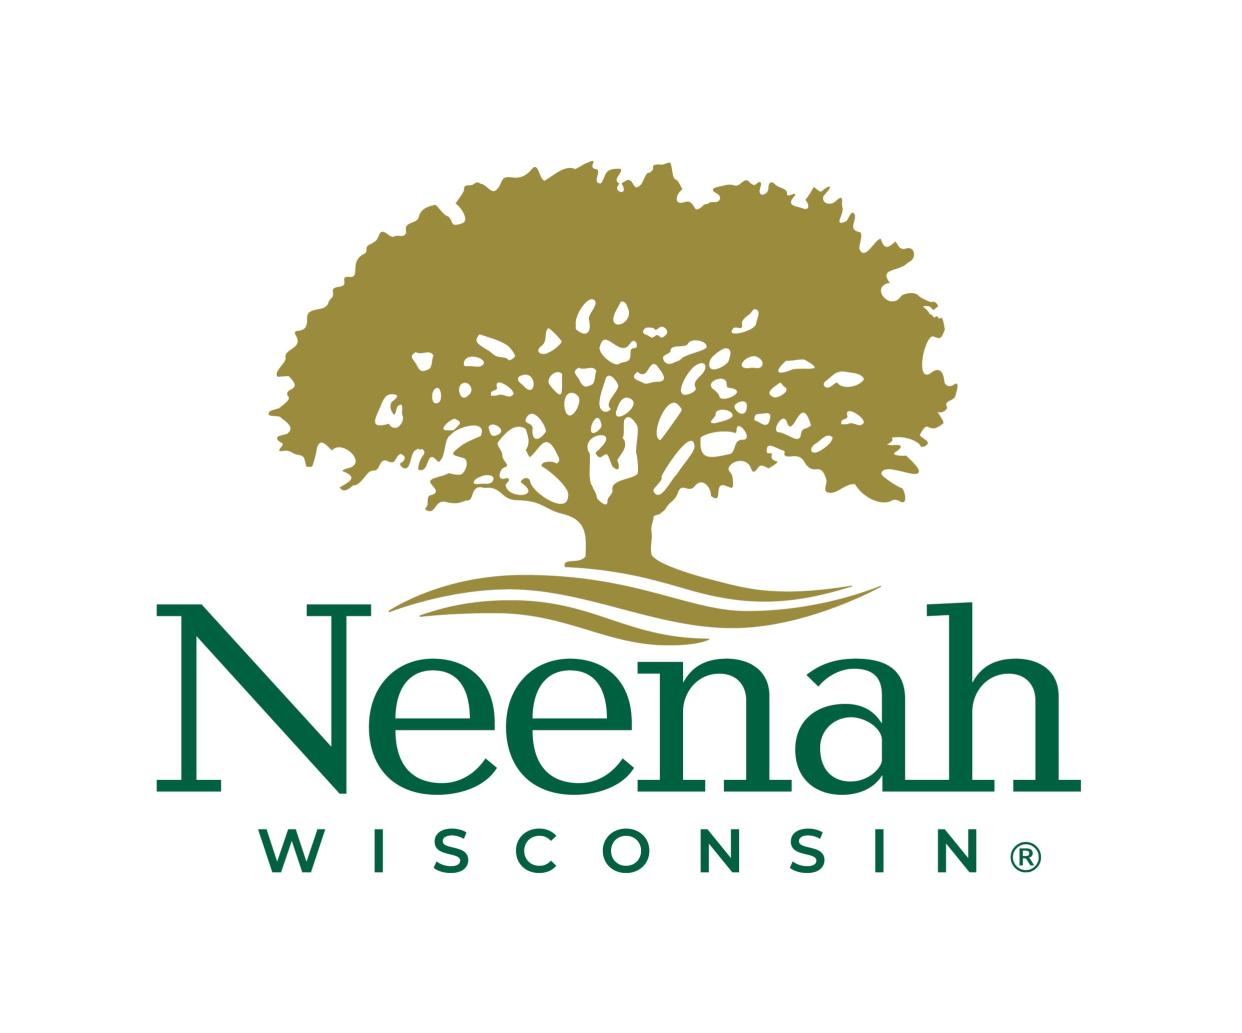 Neenah's new logo updates the image of the Council Tree.